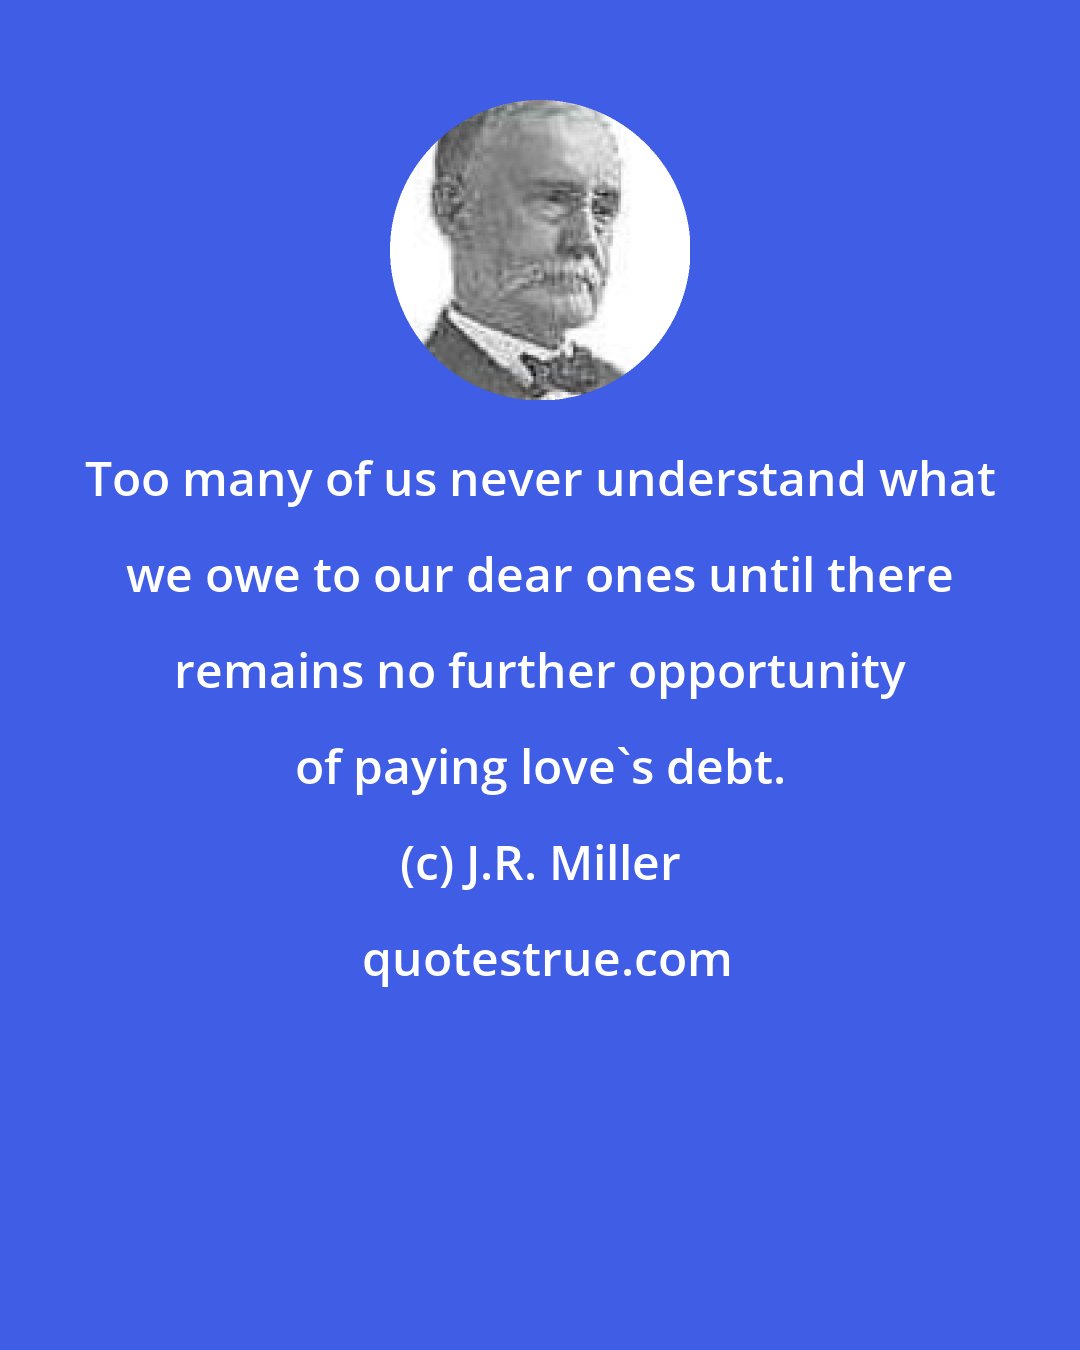 J.R. Miller: Too many of us never understand what we owe to our dear ones until there remains no further opportunity of paying love's debt.